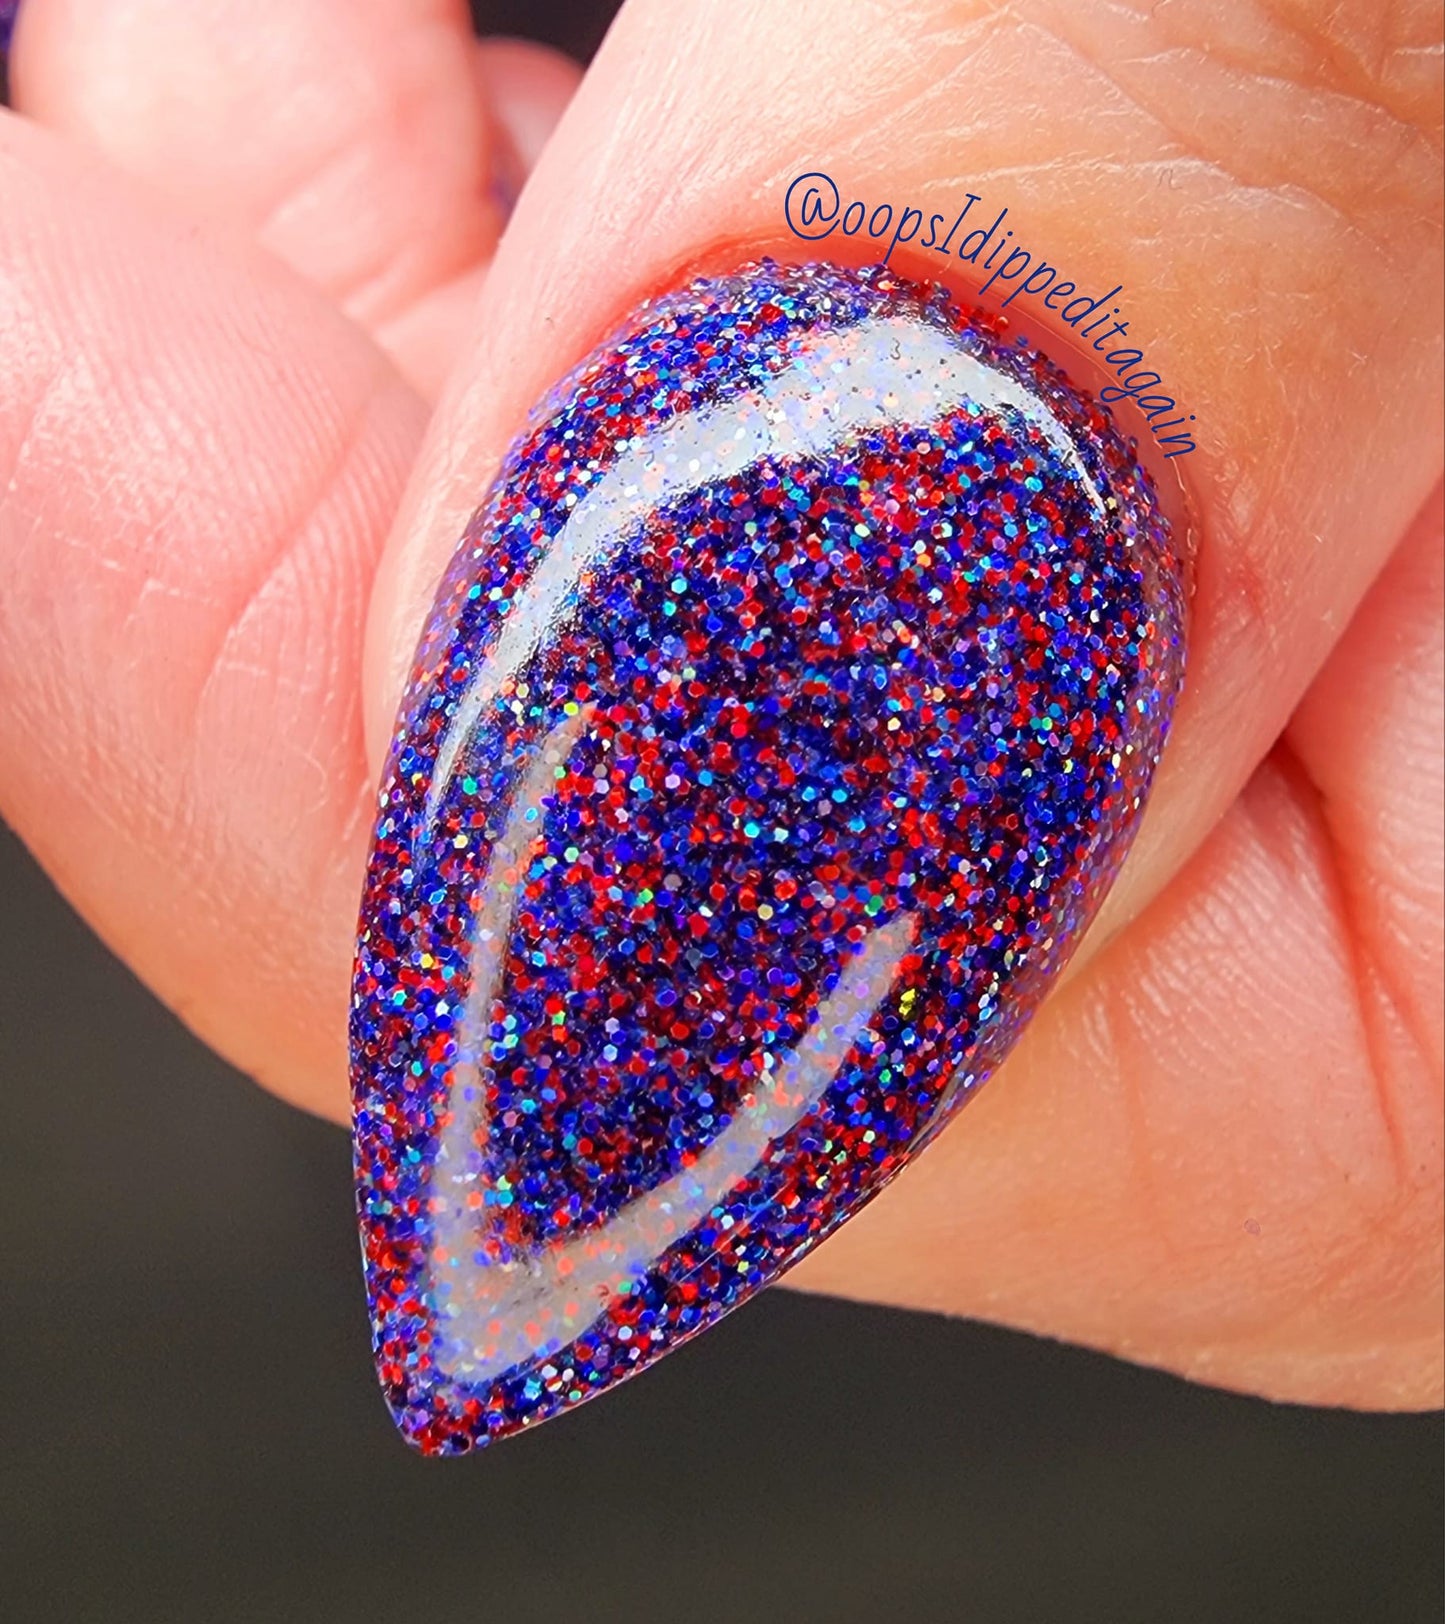 Blue and red glitter dip powder